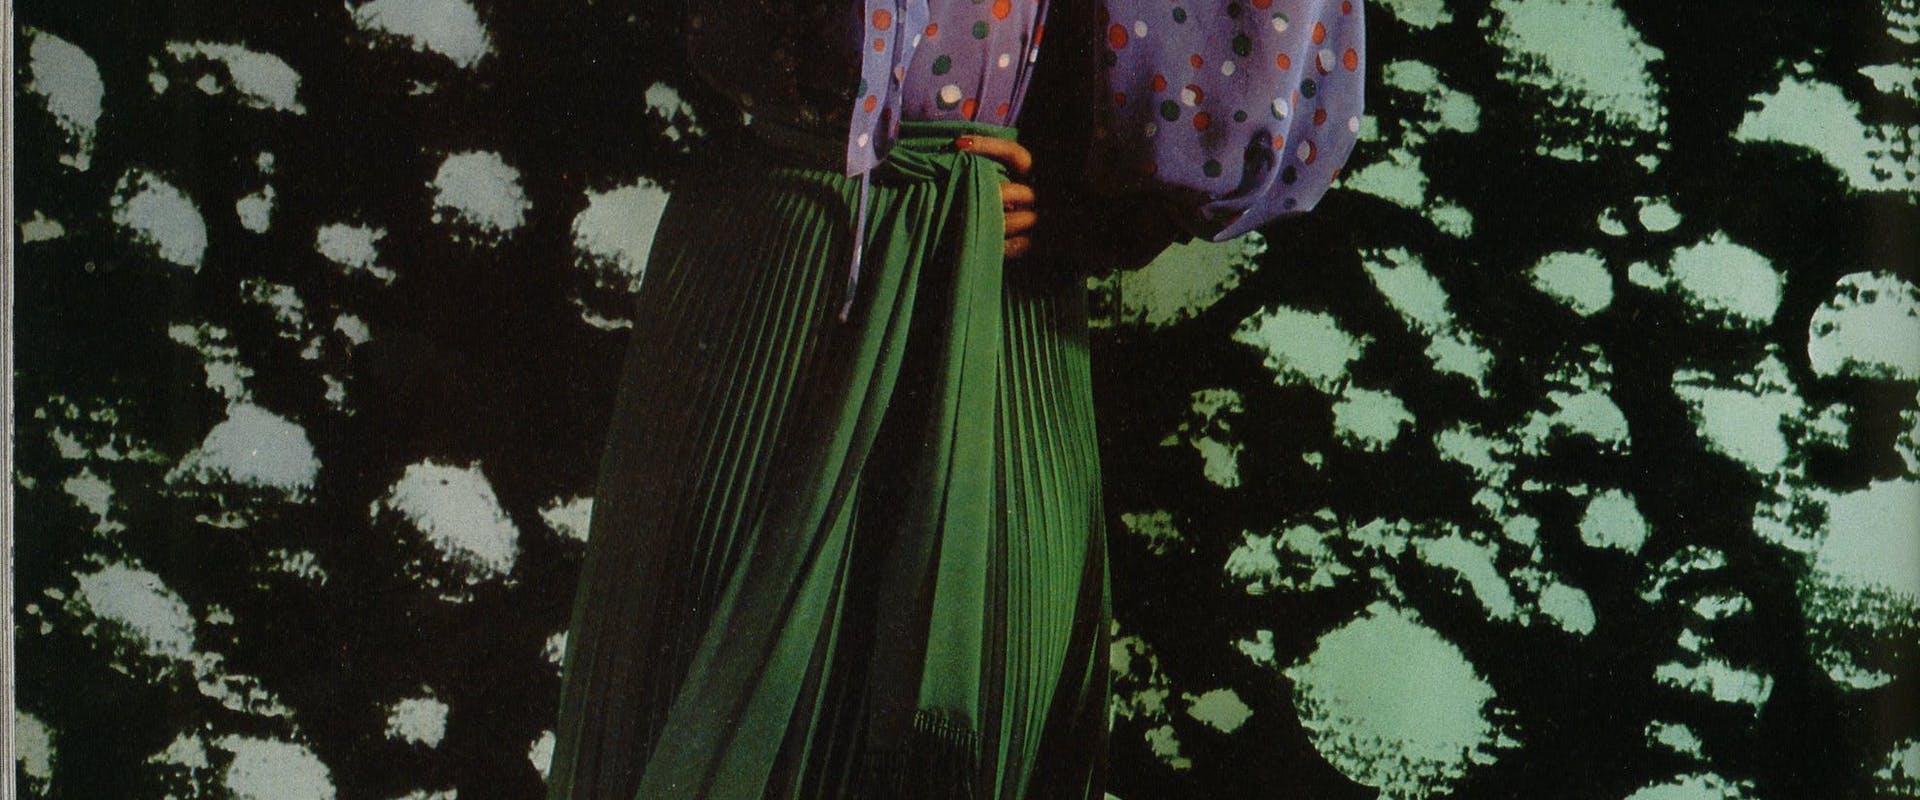 70s Fashion Designers That Paved the Way